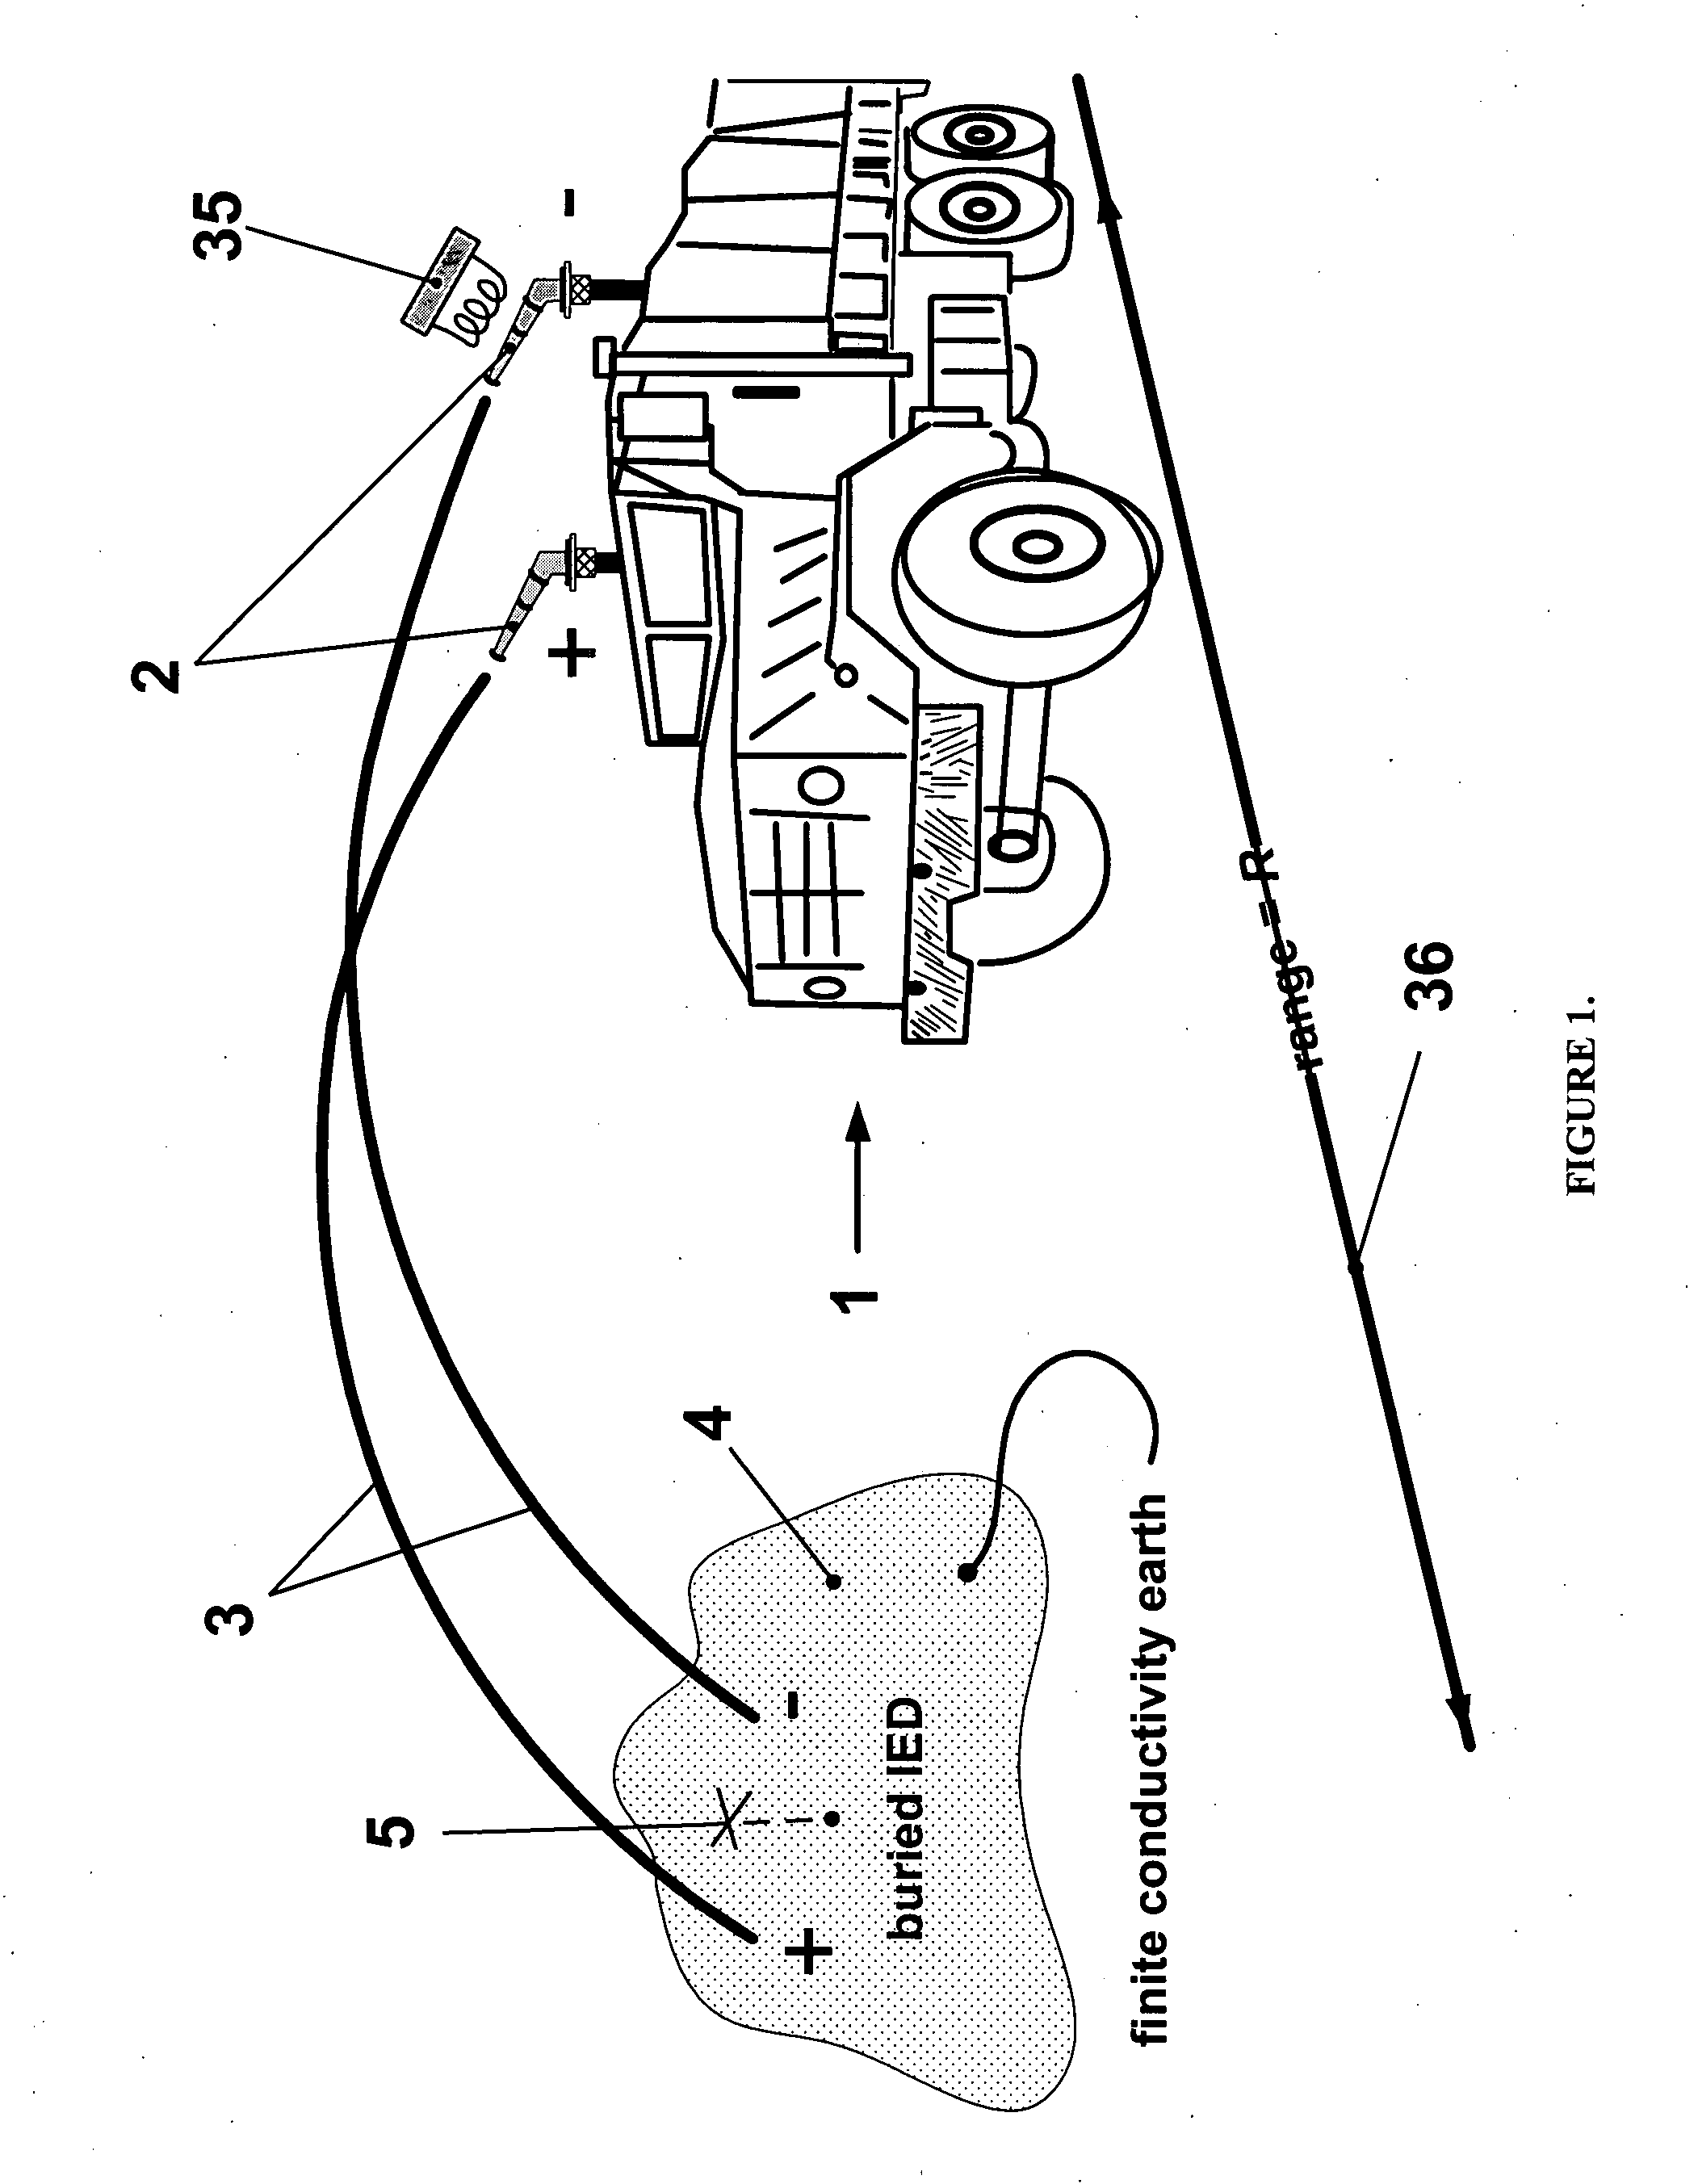 Method and apparatus for destroying or incapacitating improvised explosives, mines and other systems containing electronics or explosives